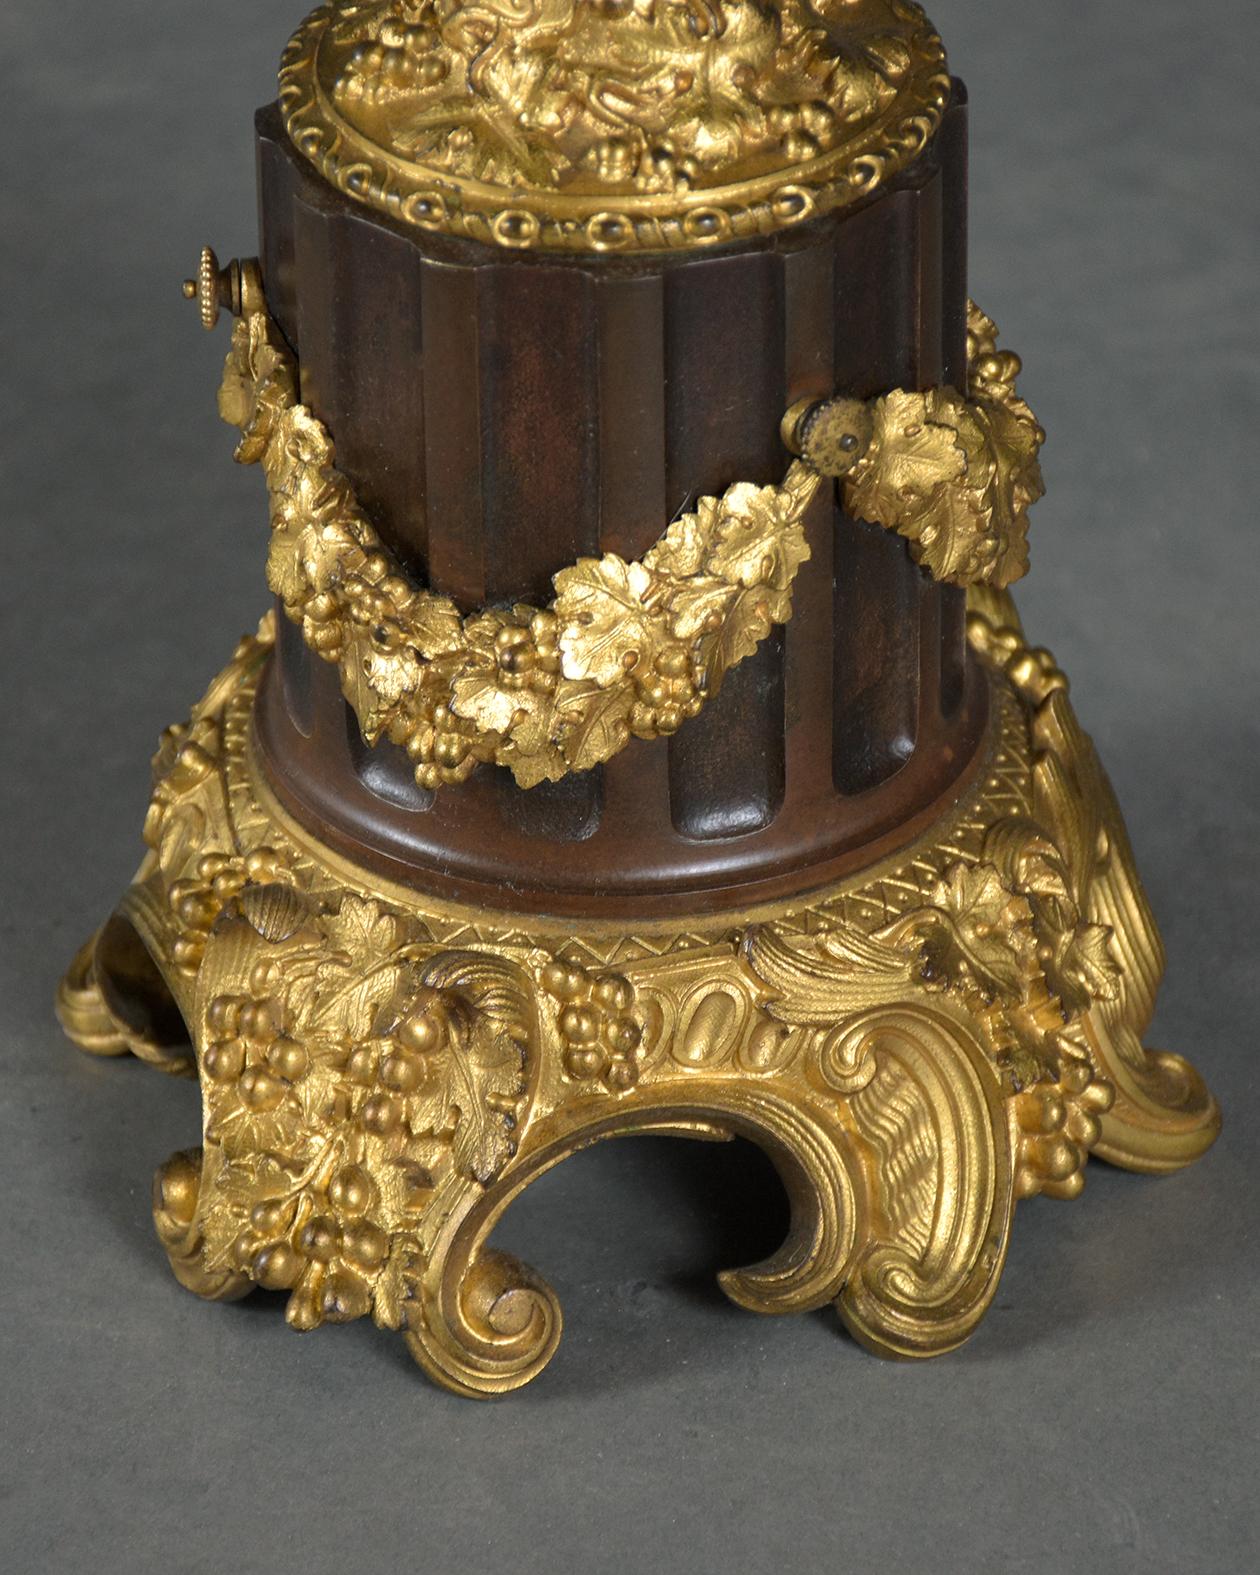 Early 19th-Century French Bronzed Urns with Gold-Plated Garland Decoration For Sale 1